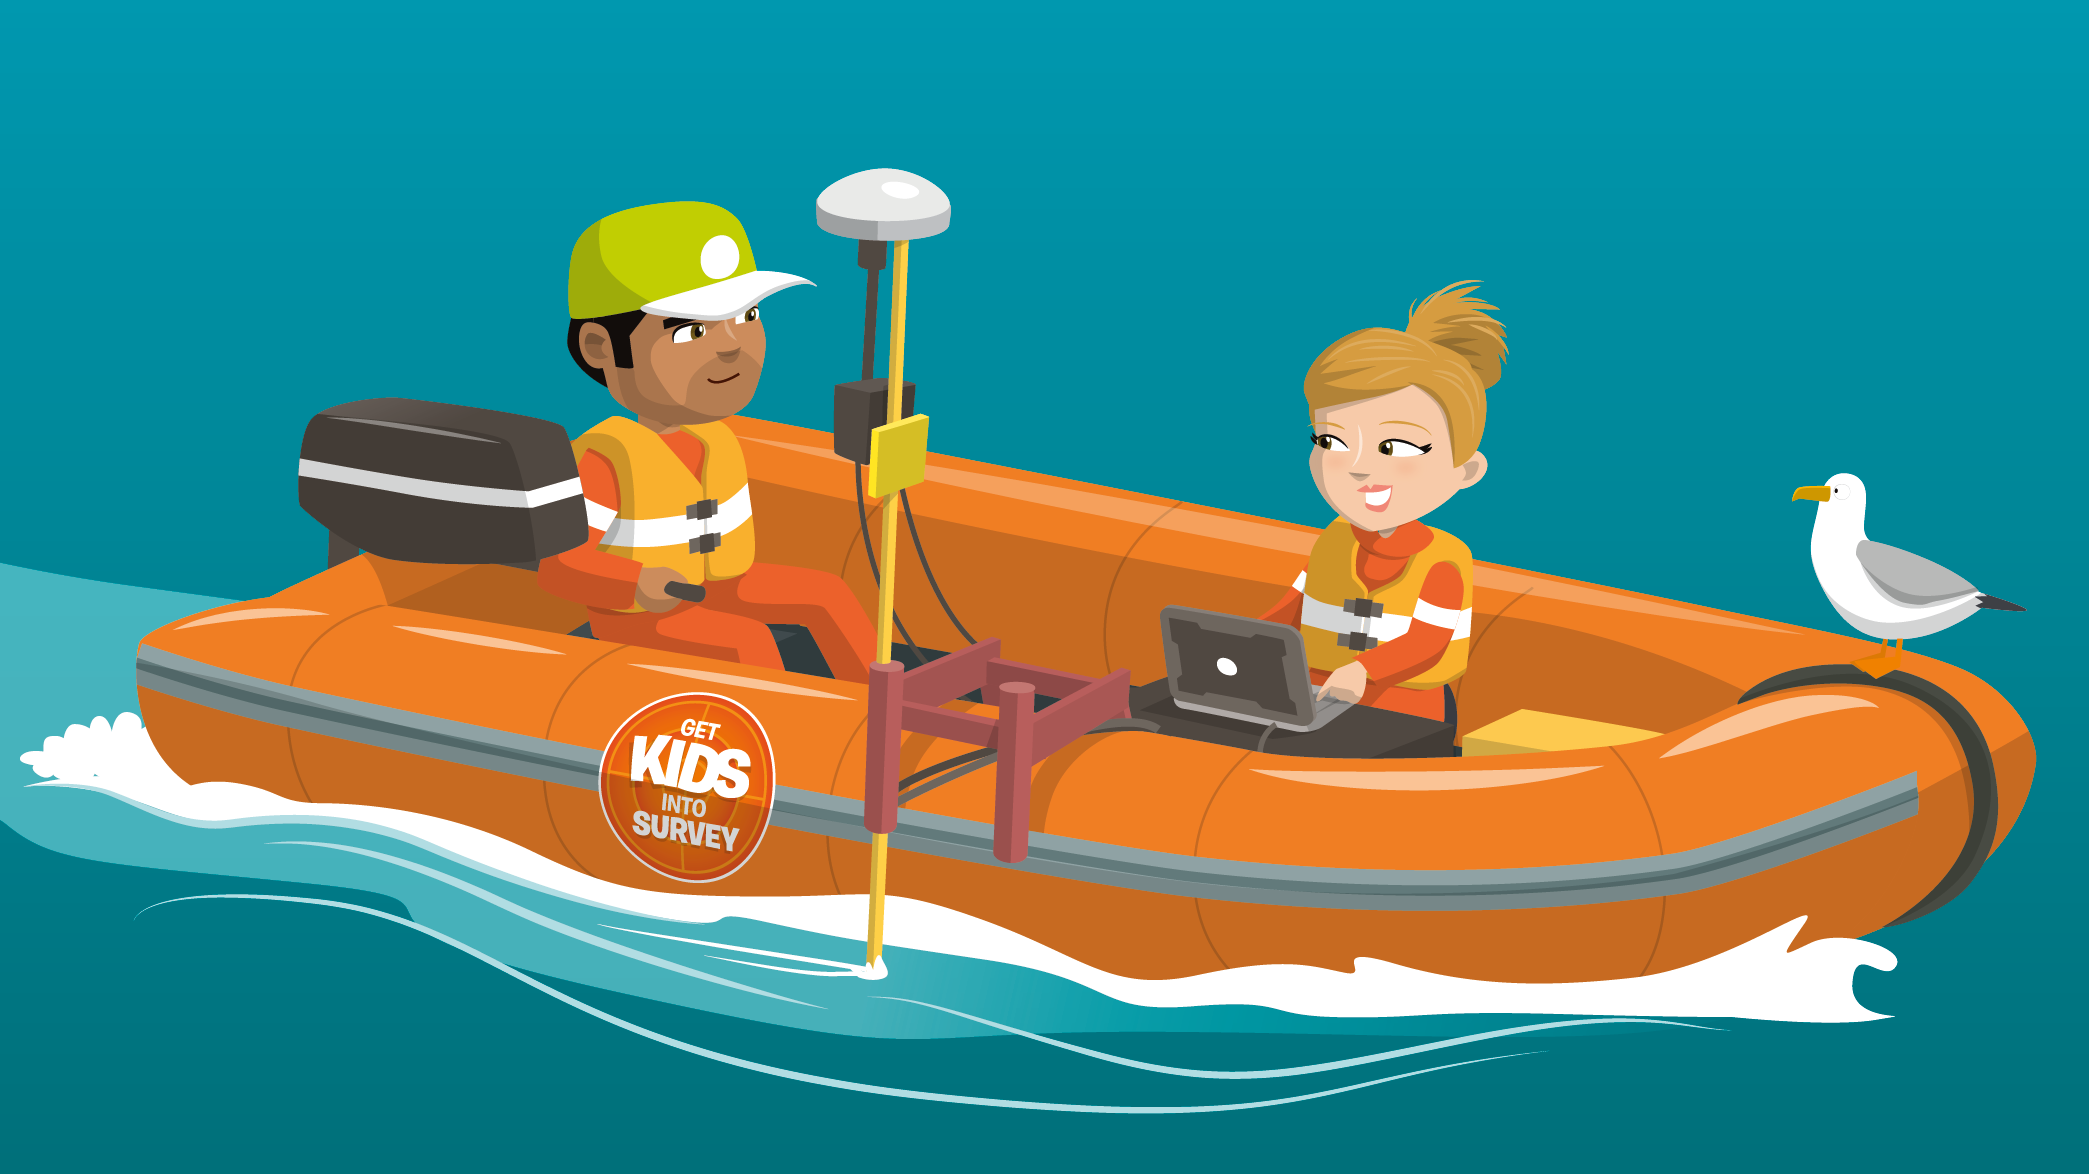 Get kids into survey poster hydro surveyor characters